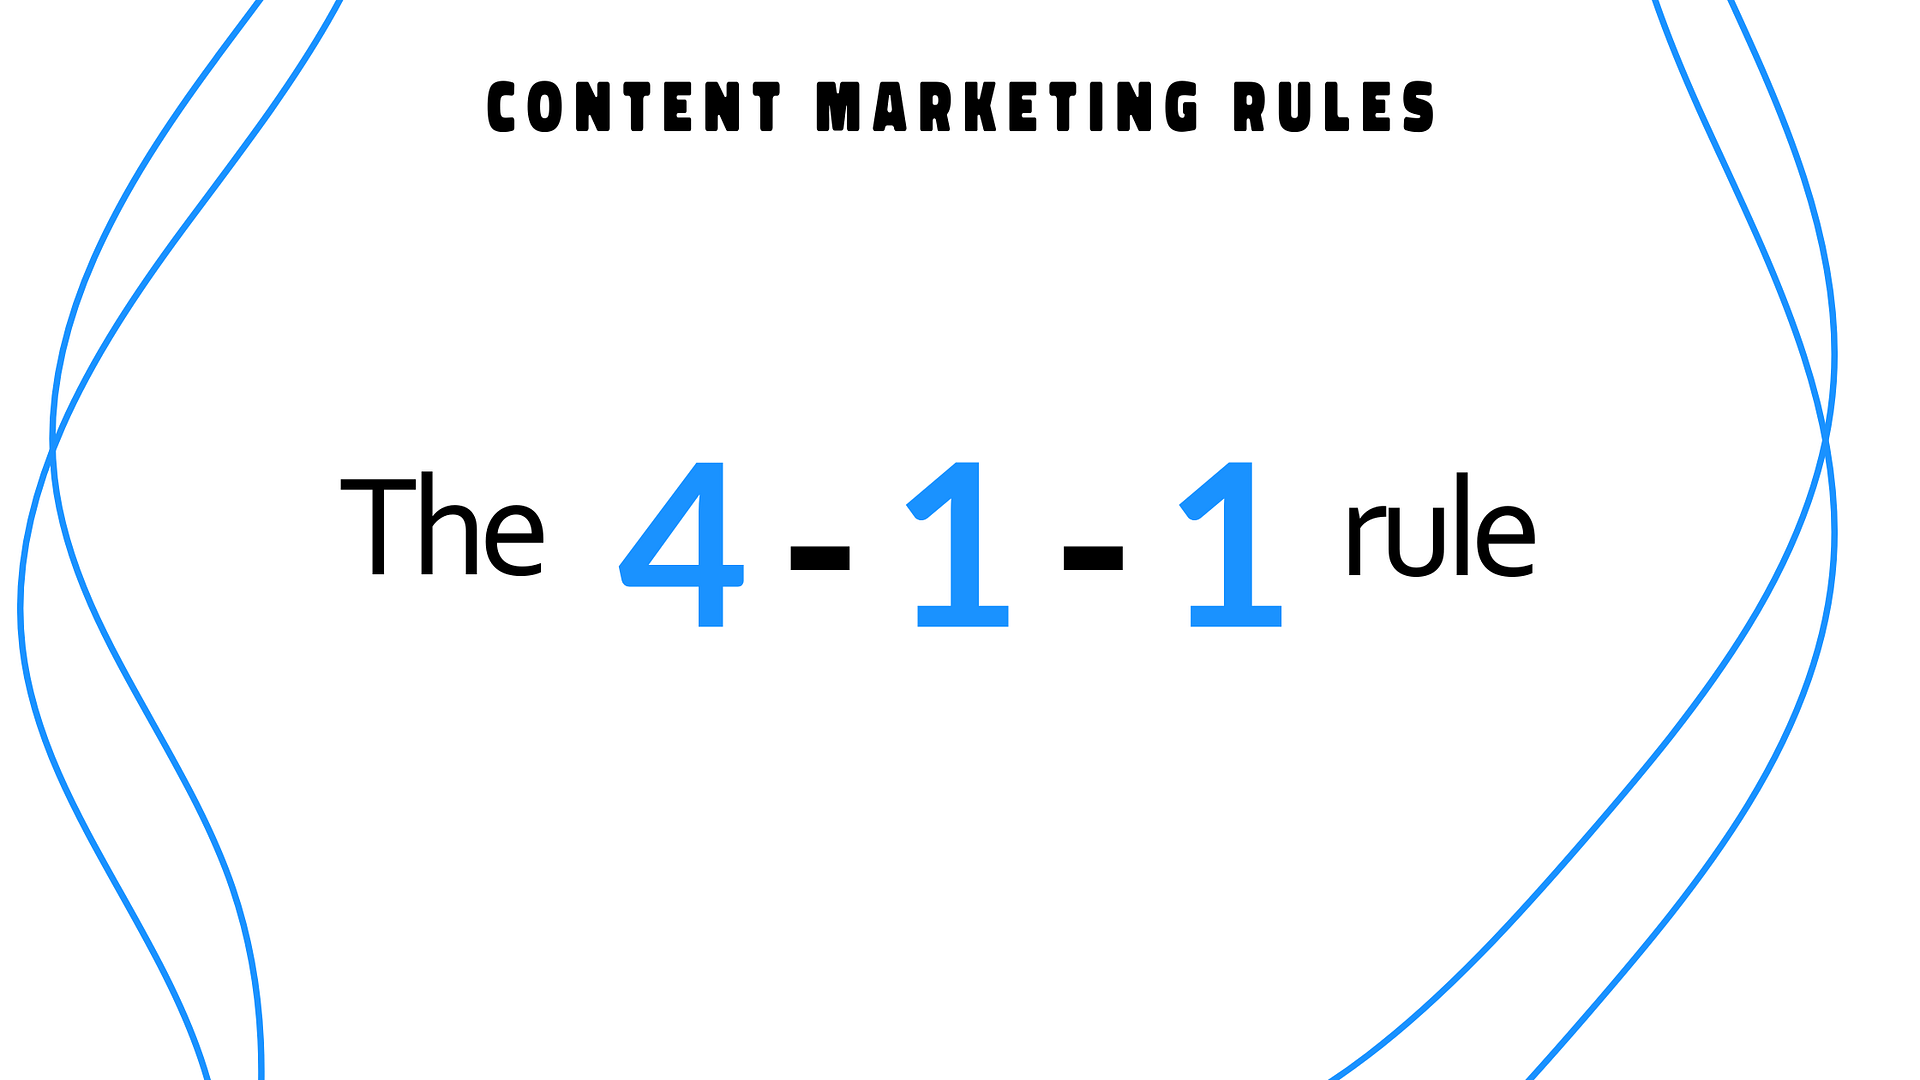 Content marketing rules: The 4-1-1 rule